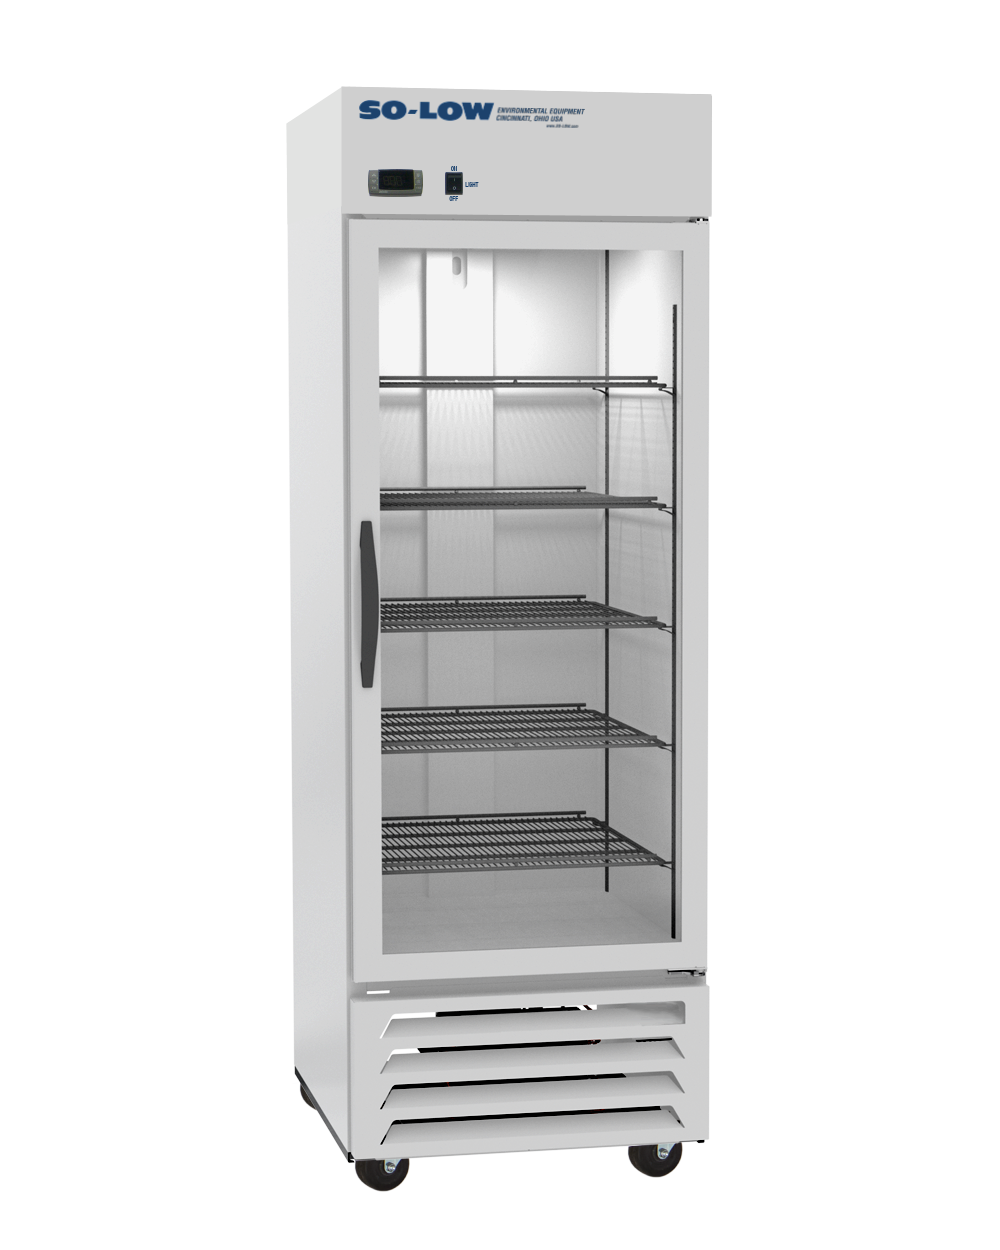 So-Low 2ºC to 8ºC, 23 cu.ft., single glass door, Cycle Defrost, 115v